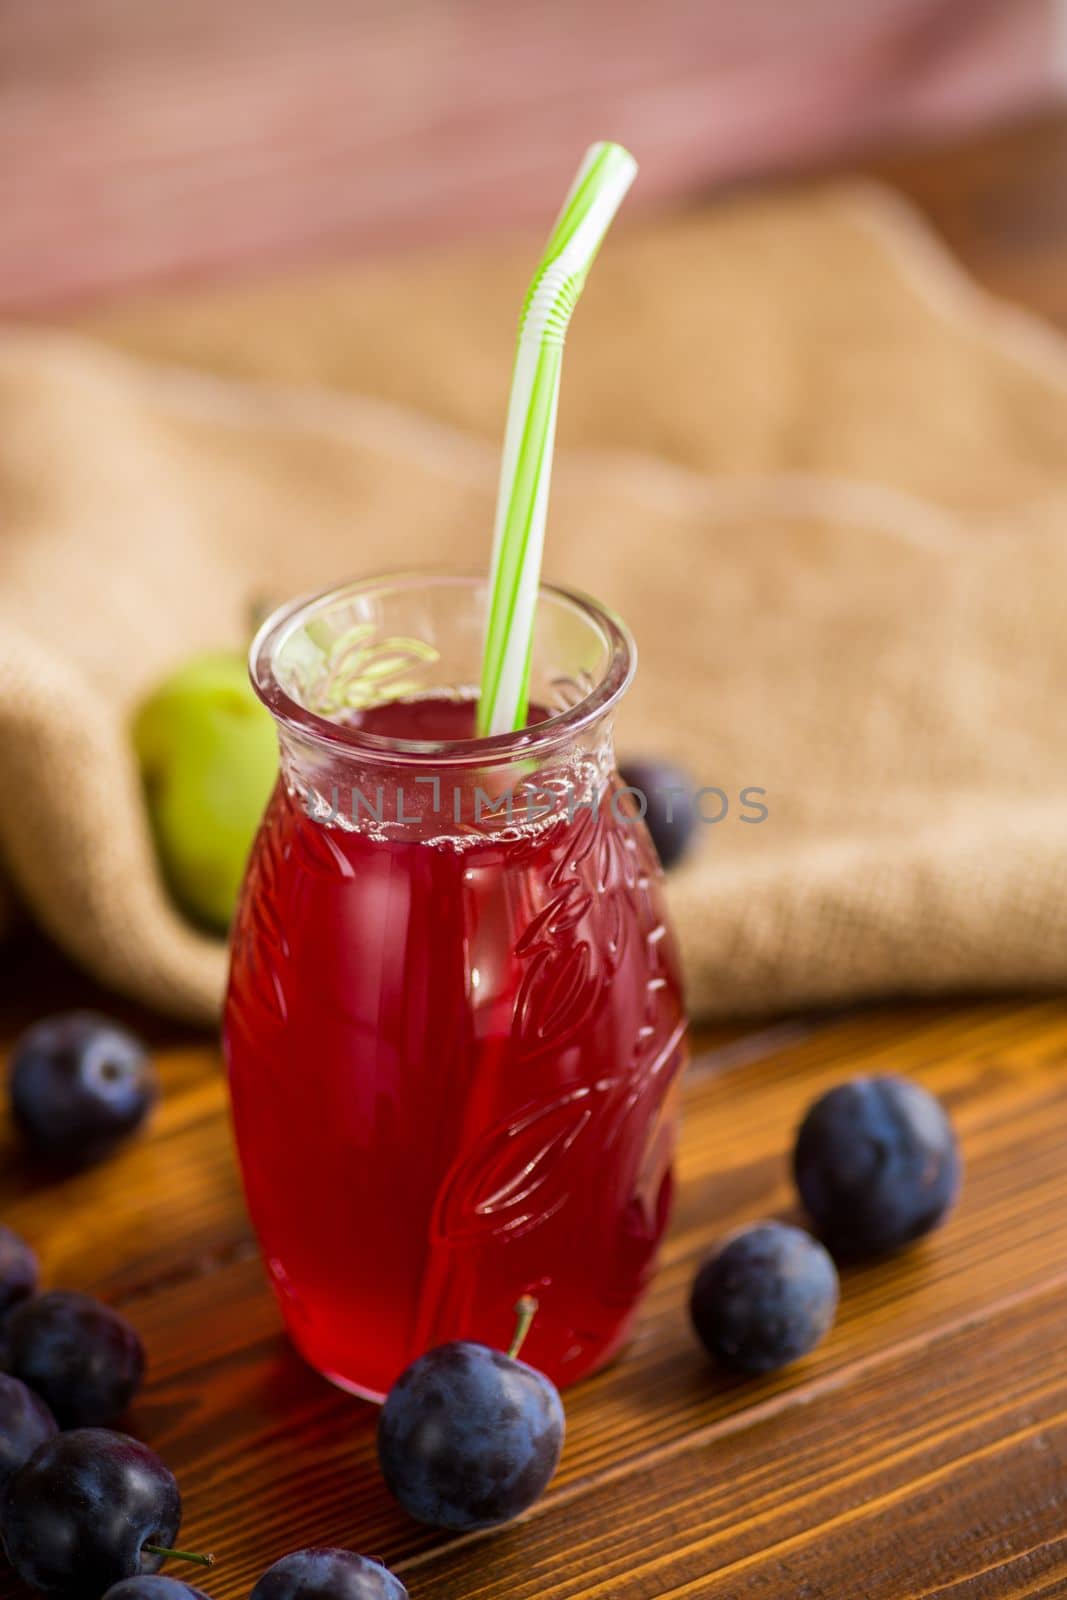 Sweet natural plum drink in a glass with a straw on a wooden table